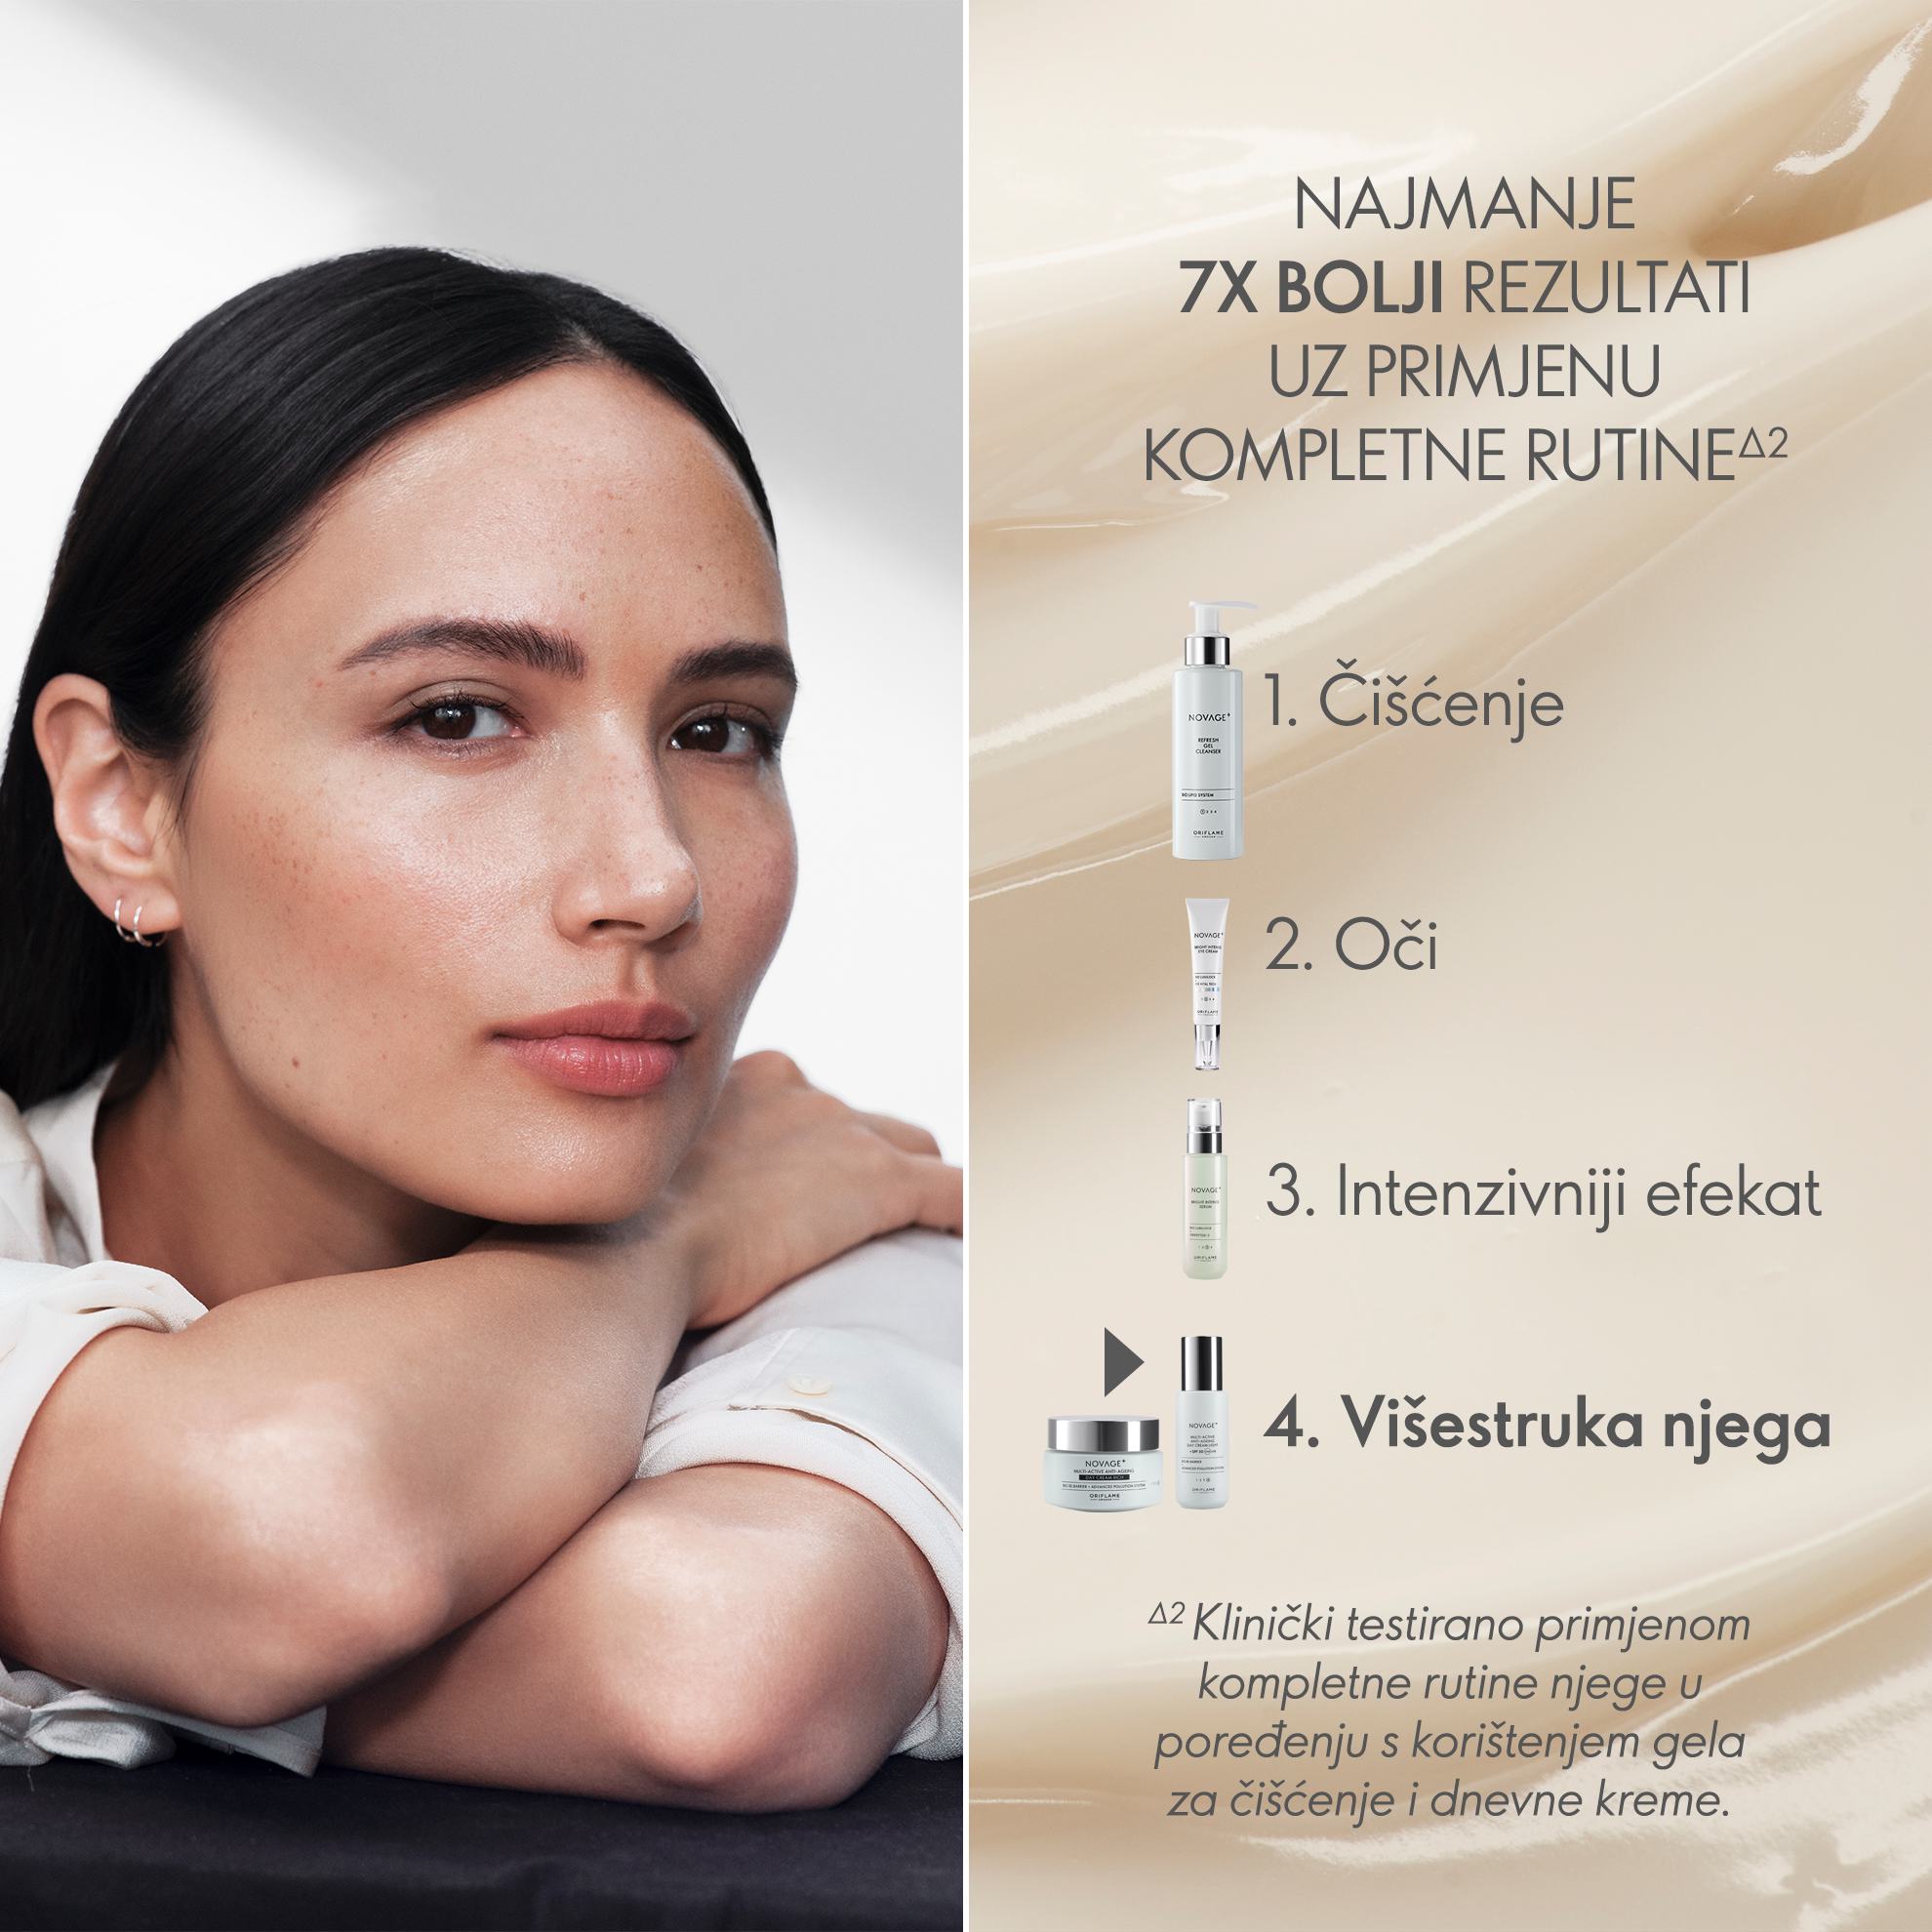 https://media-cdn.oriflame.com/productImage?externalMediaId=product-management-media%2fProducts%2f41047%2fBA%2f41047_5.png&id=17590741&version=2